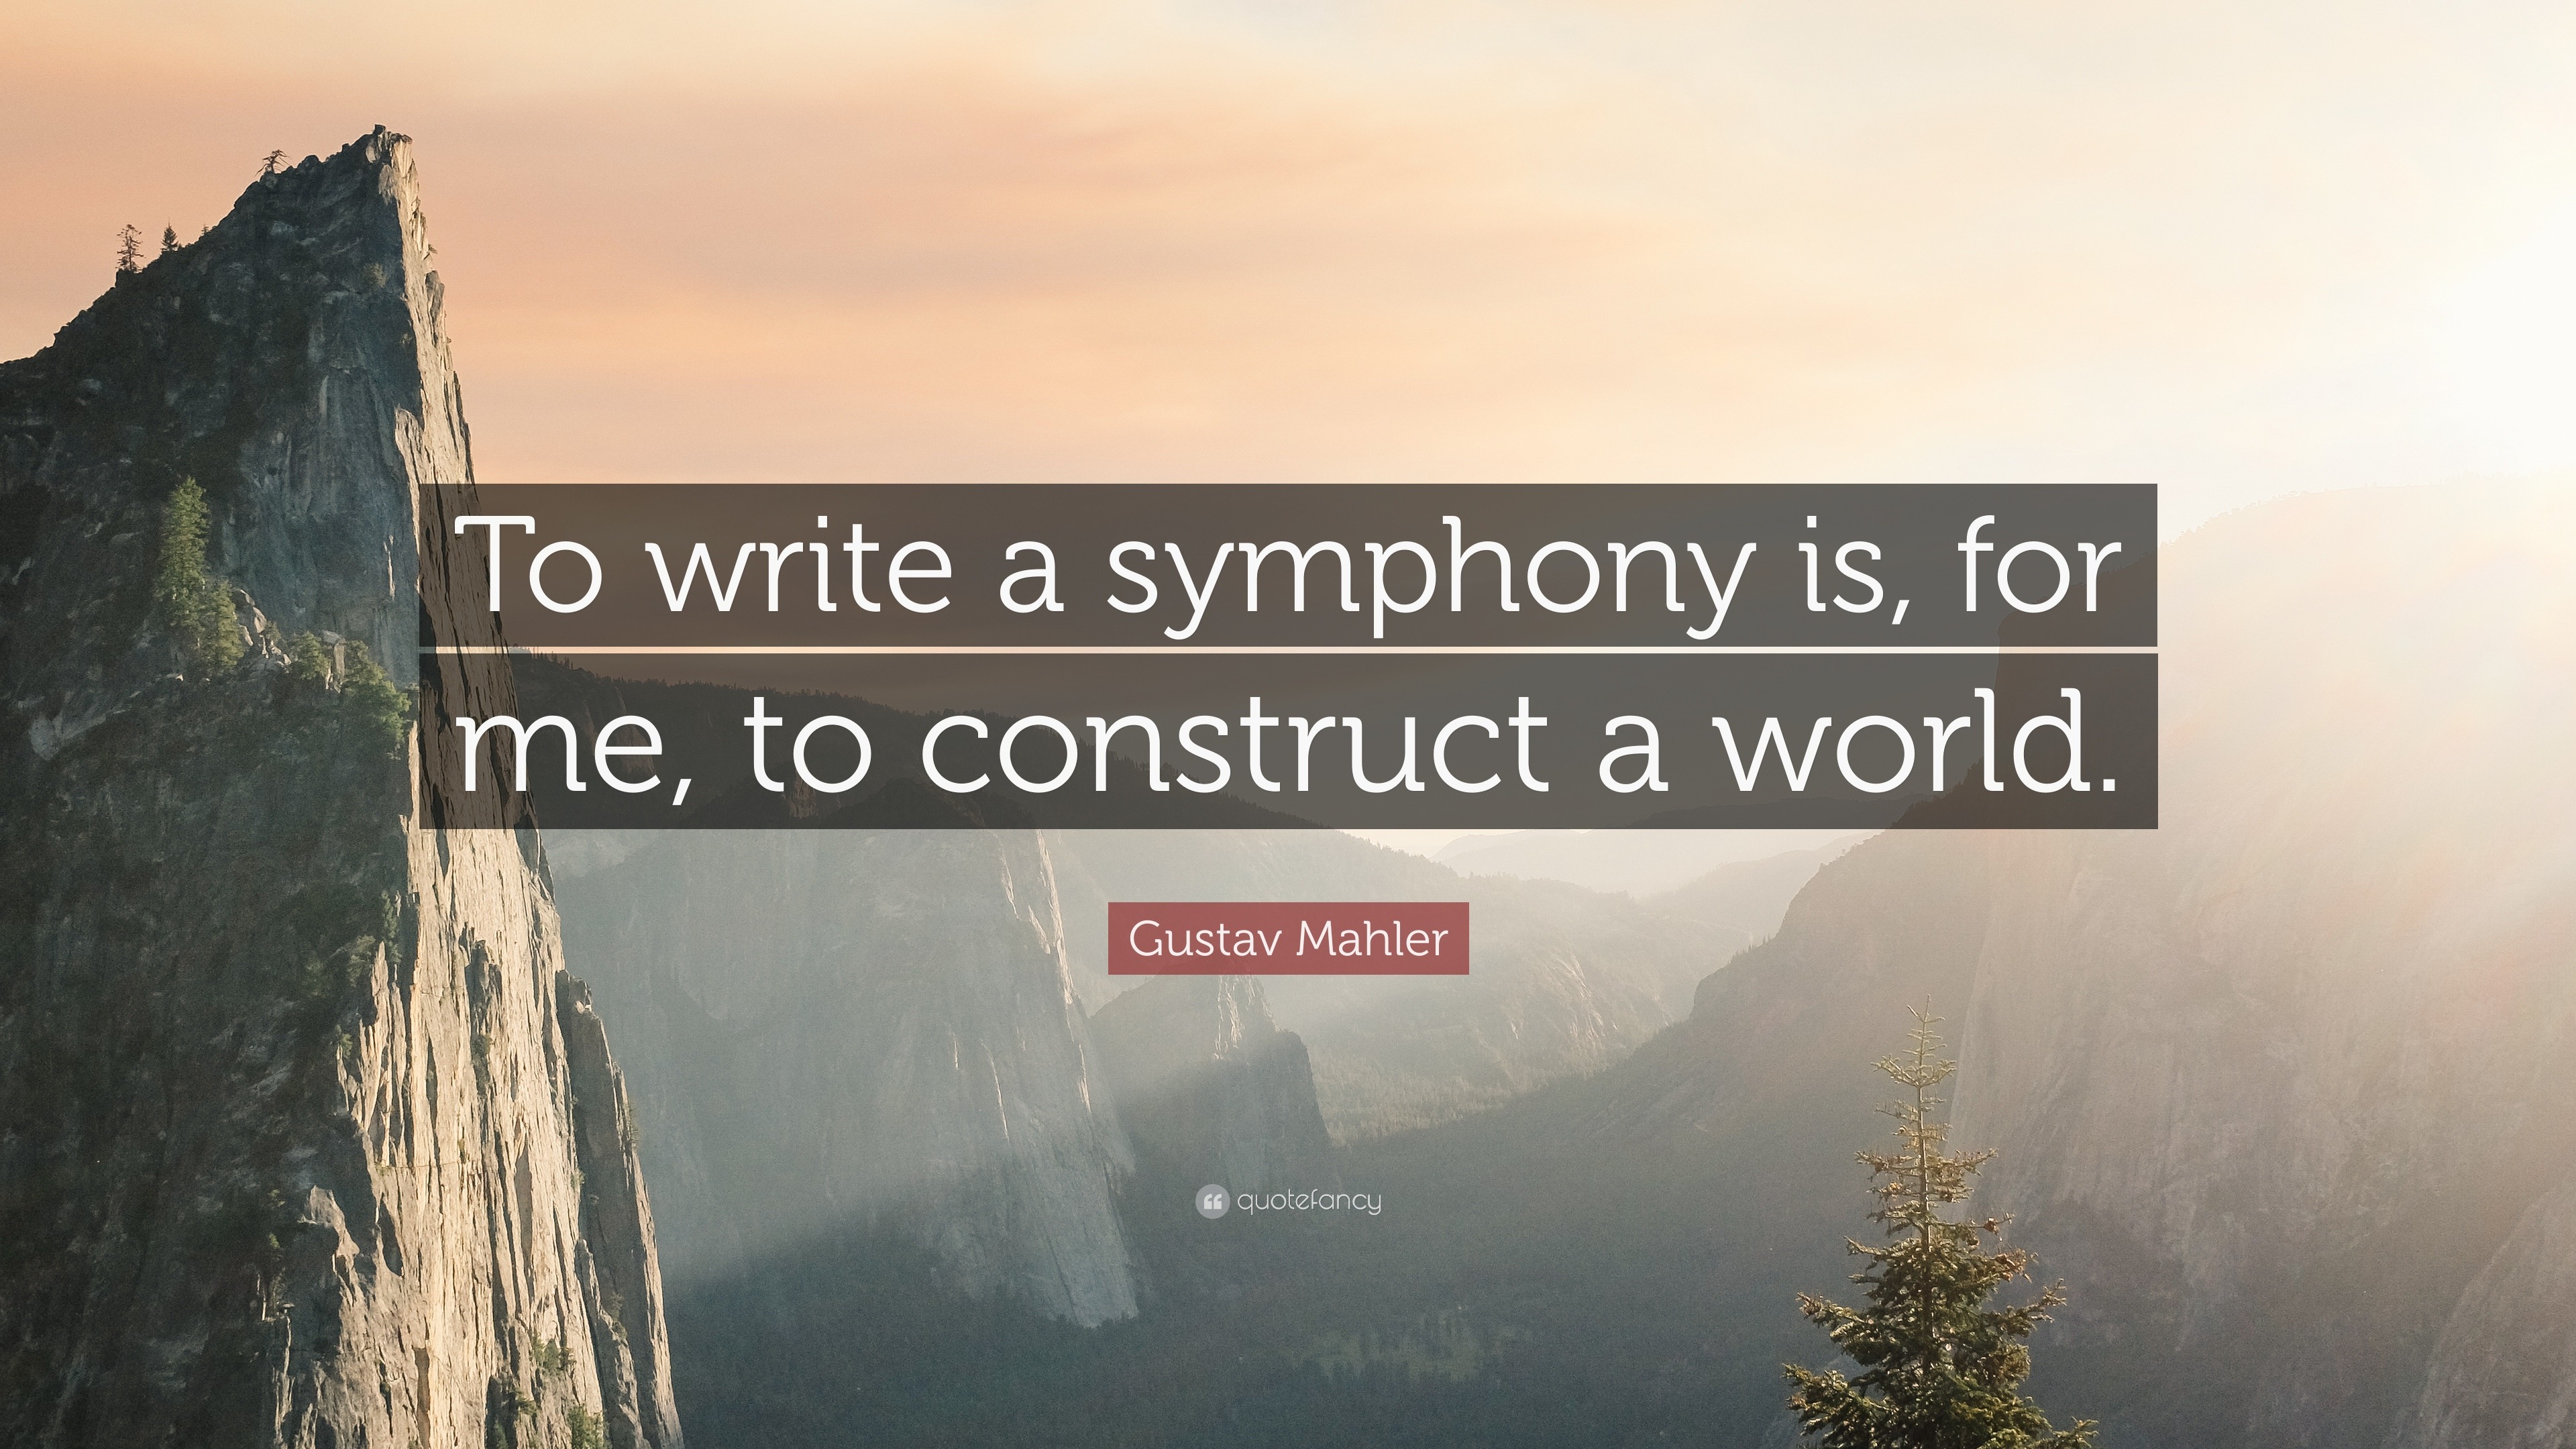 Gustav Mahler Quote: “To write a symphony is, for me, to construct